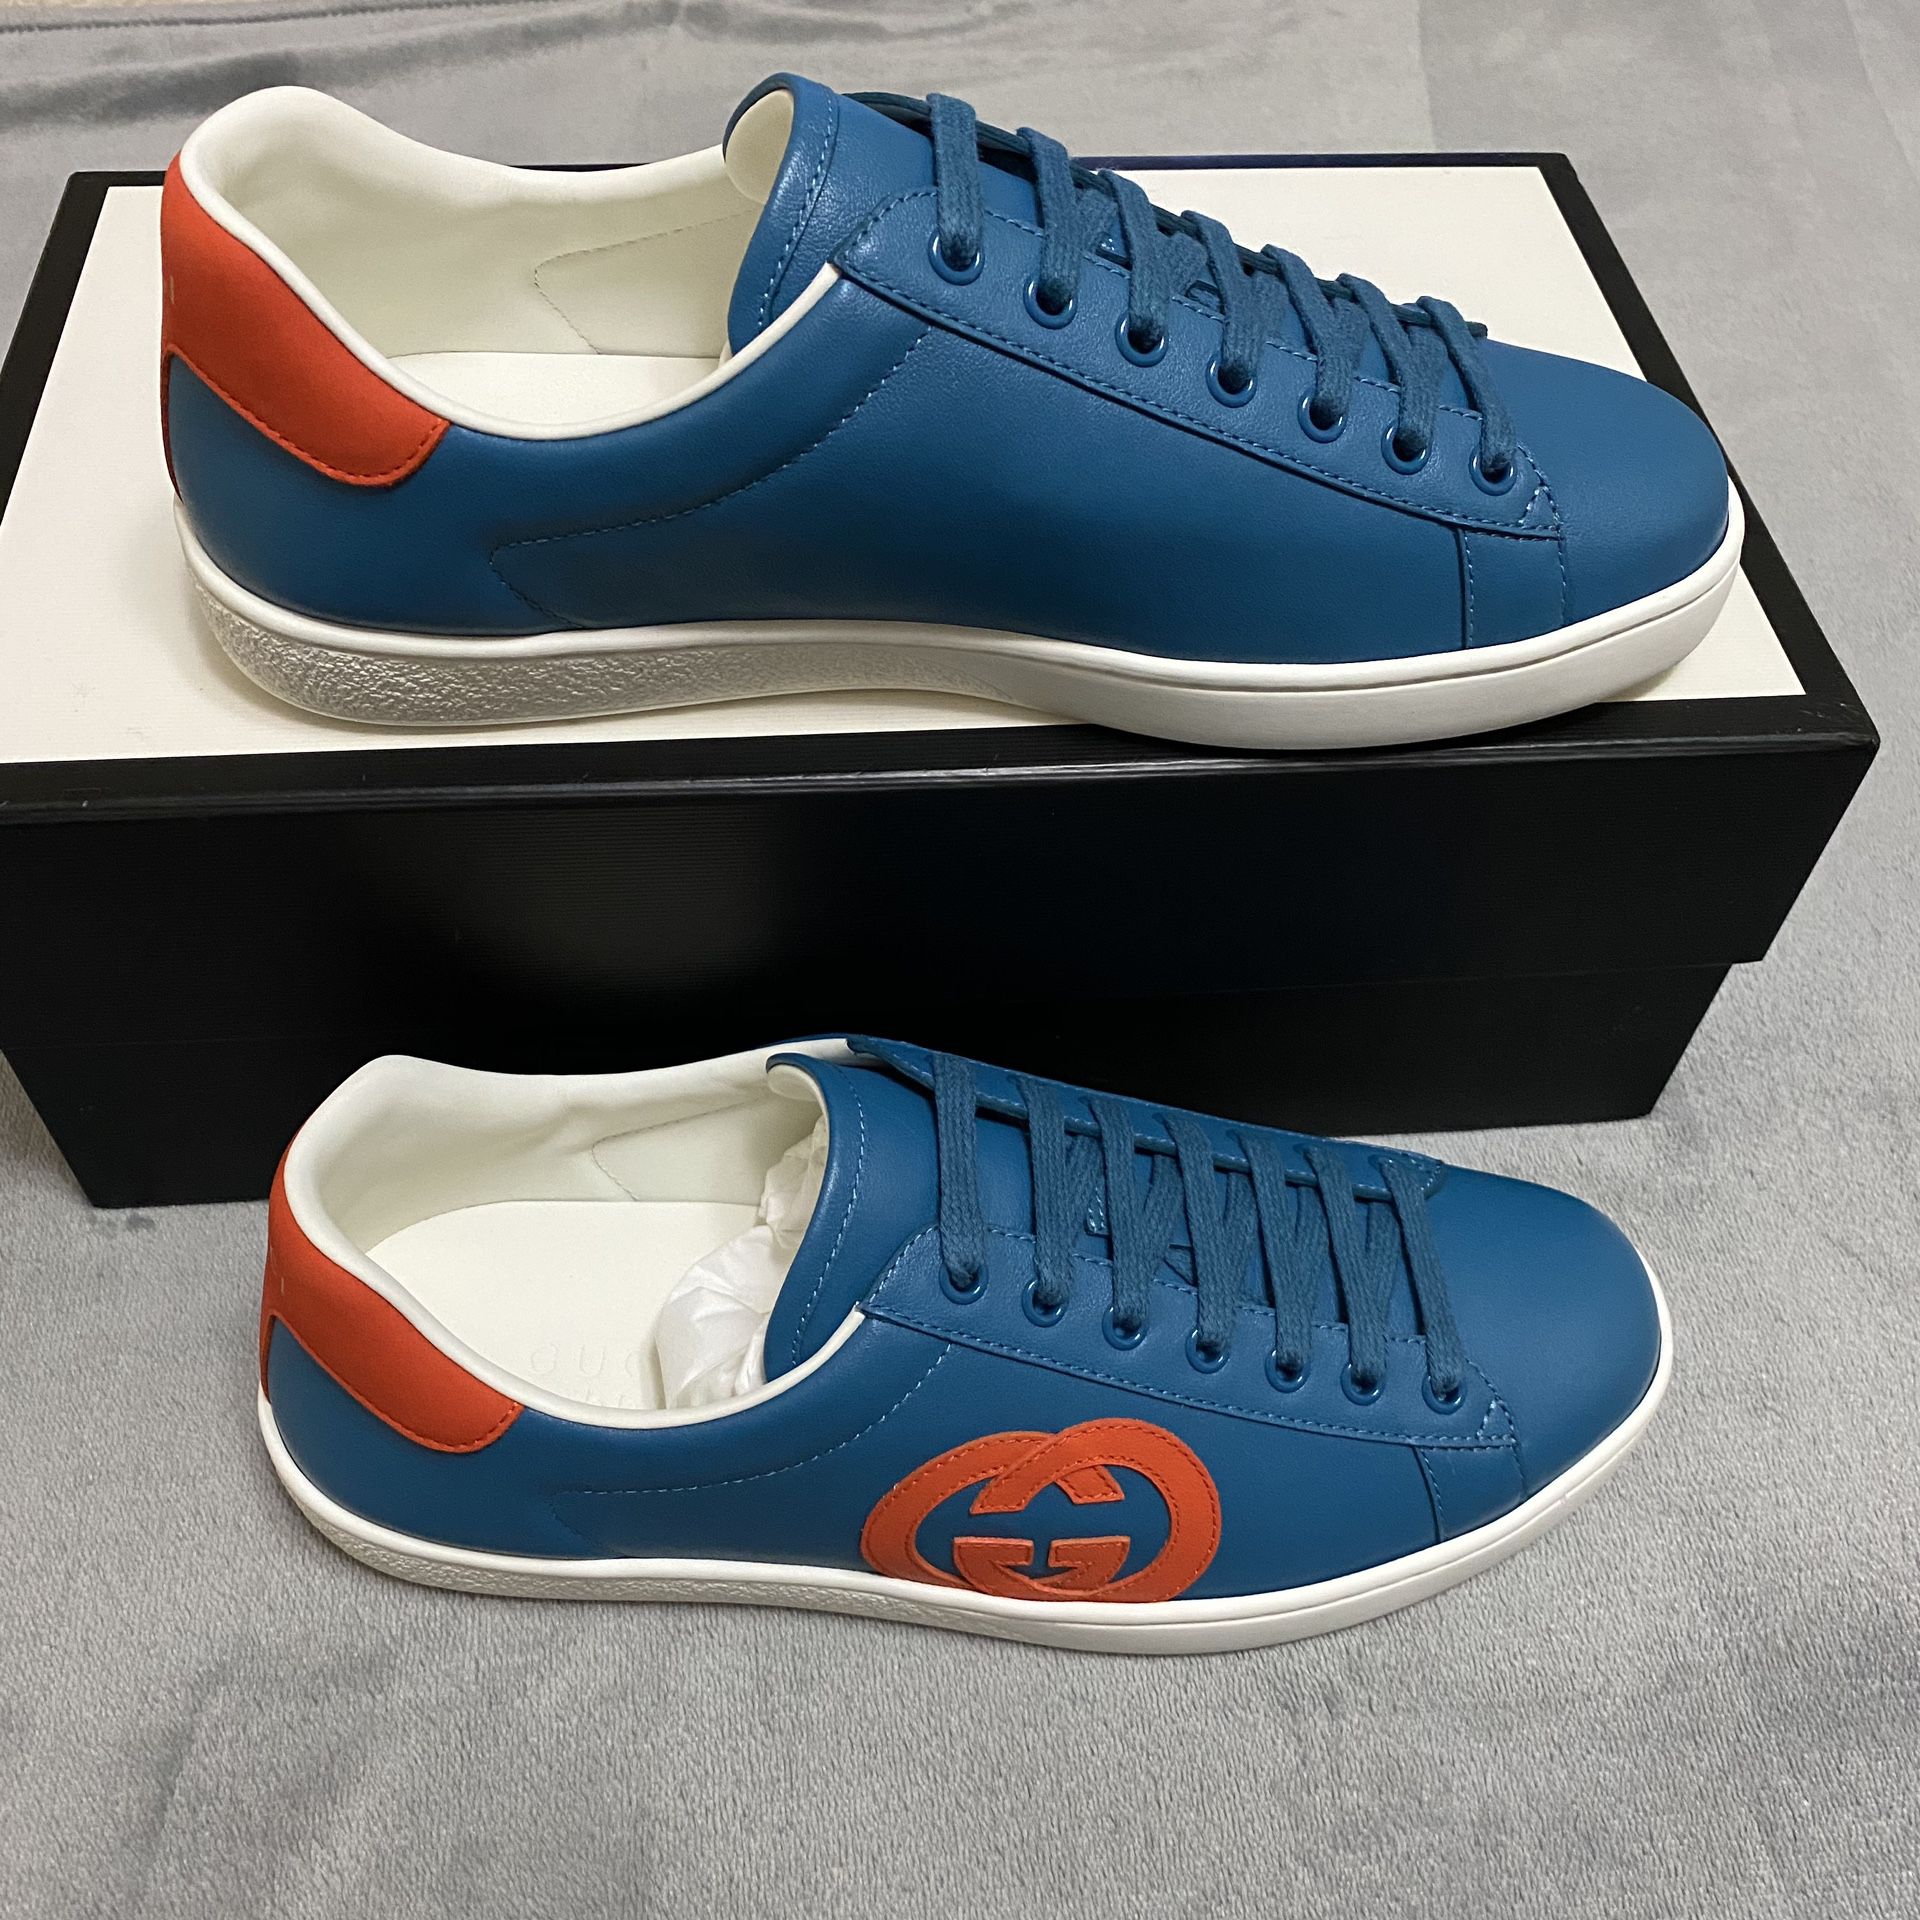 Gucci Ace Sneakers Men Size 10US